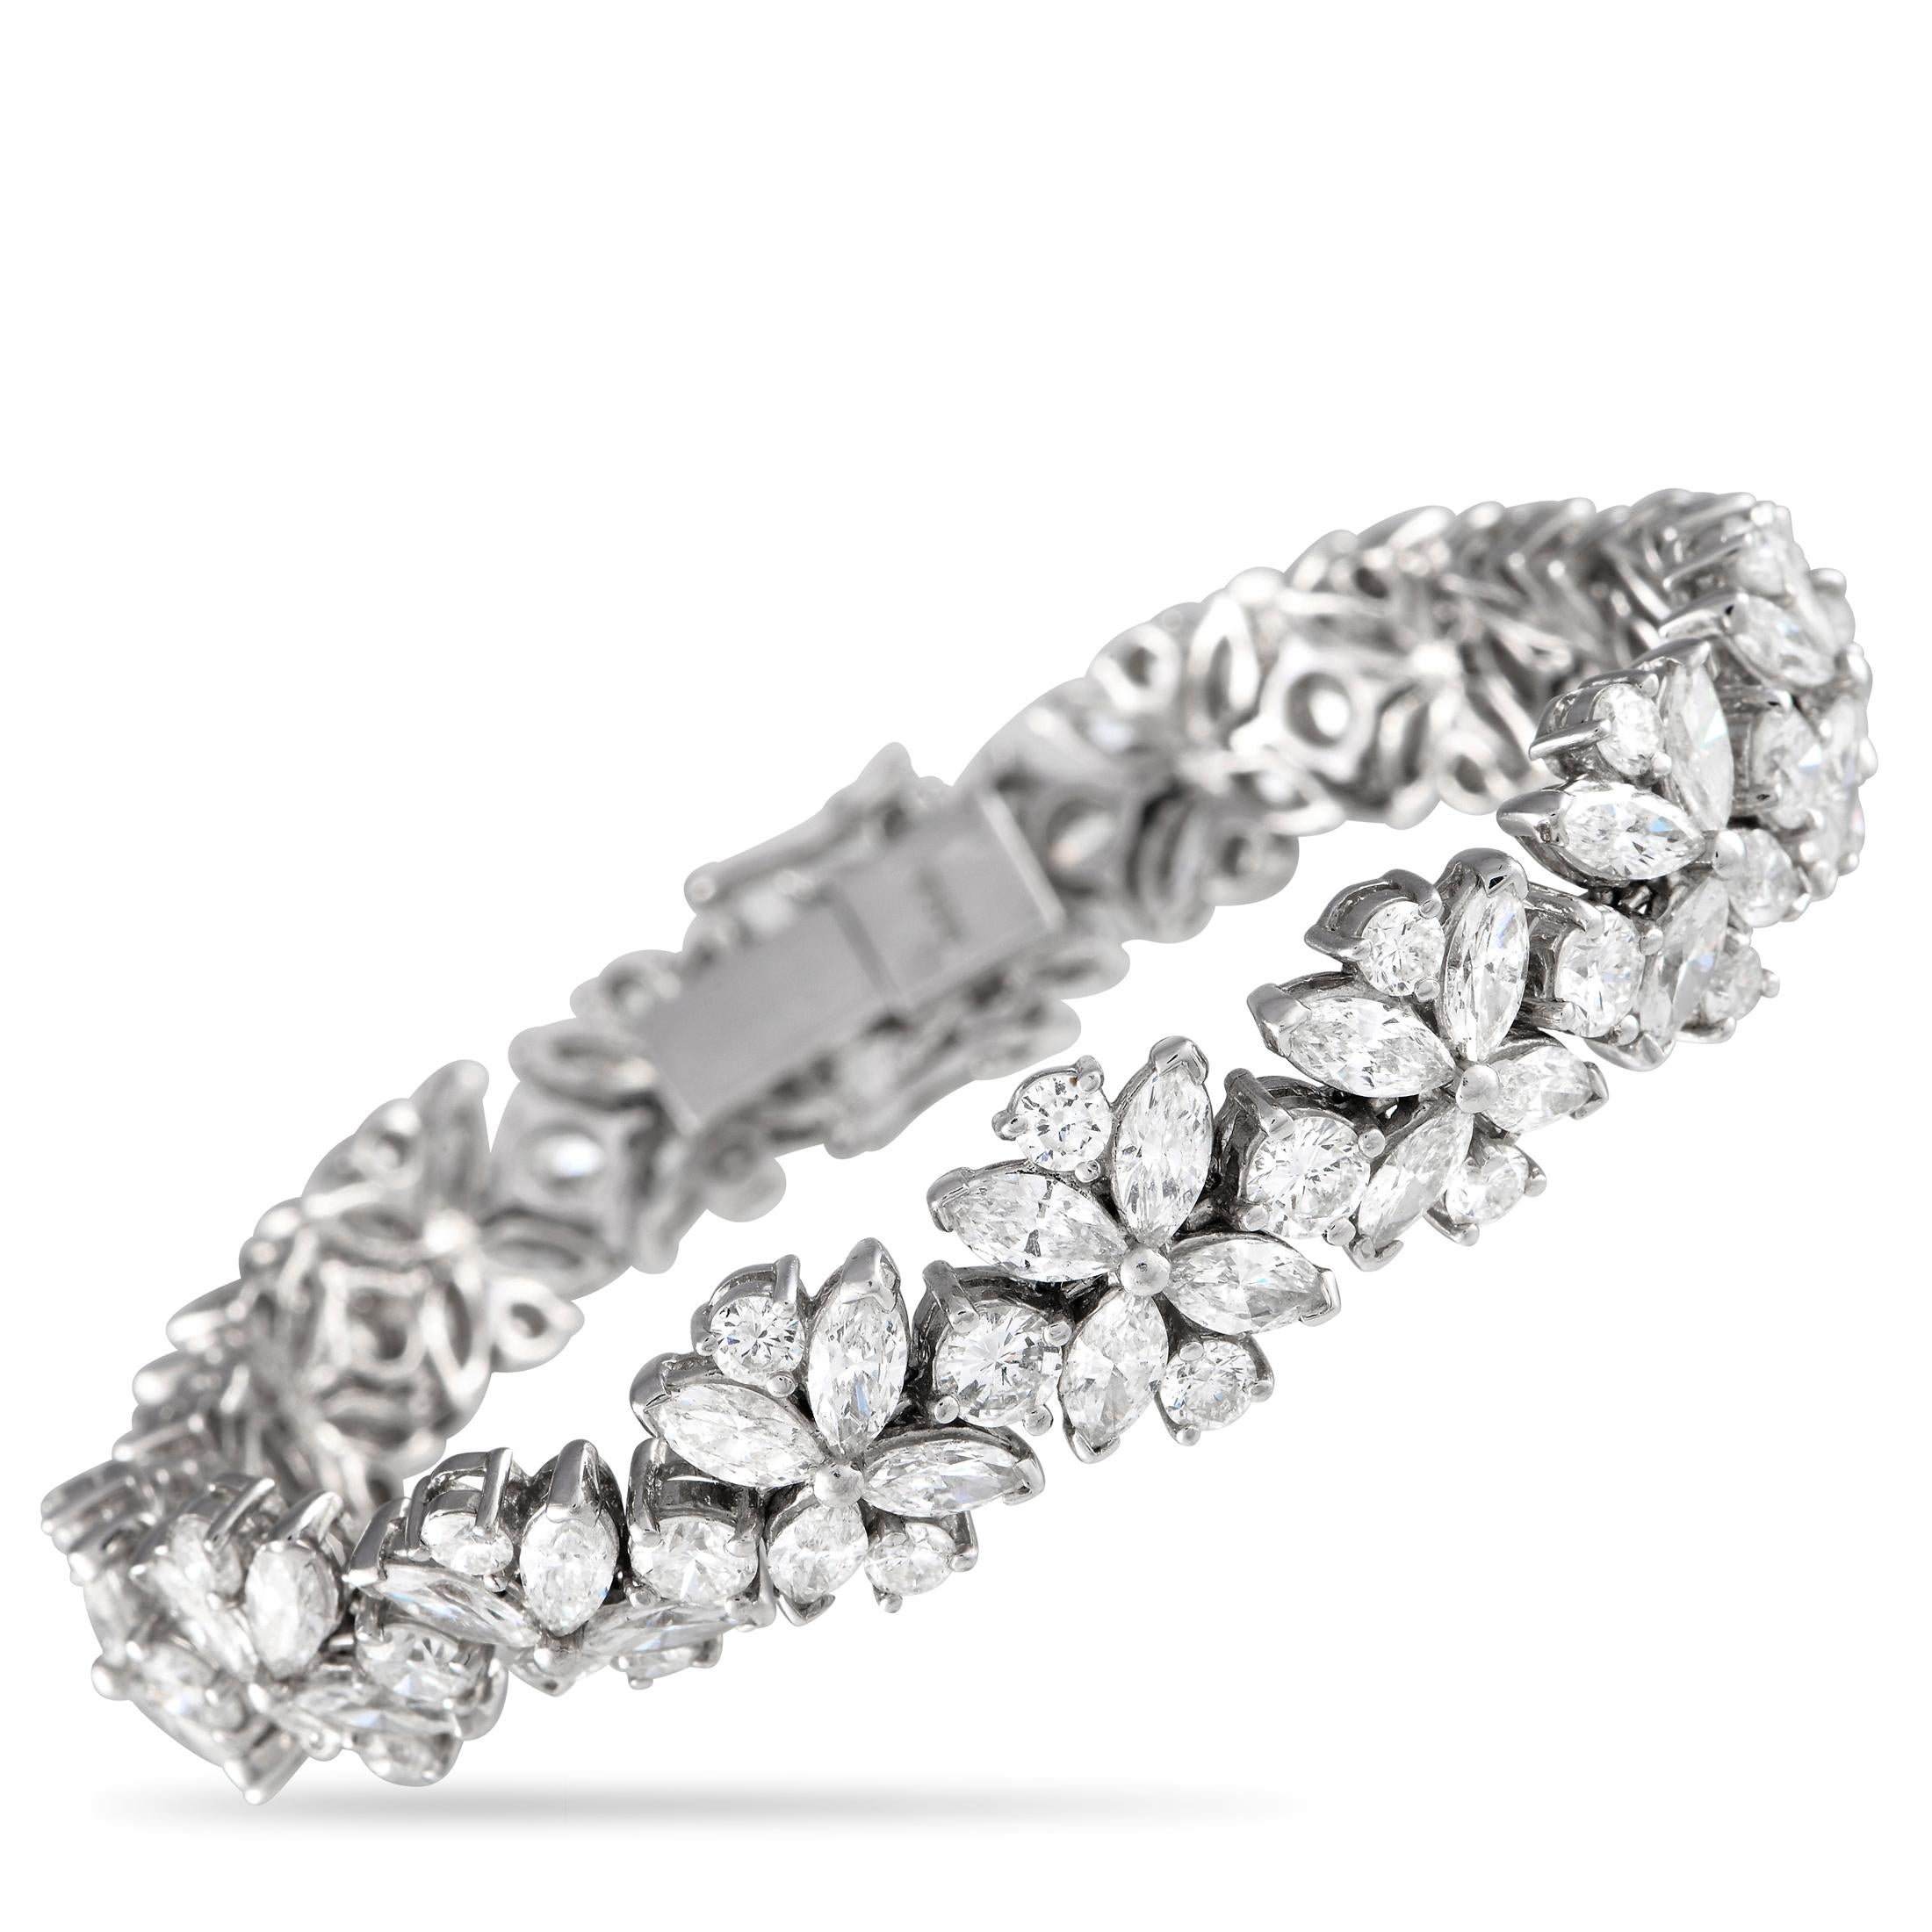 Platinum 15.0ct Diamond Bracelet In Excellent Condition For Sale In Southampton, PA